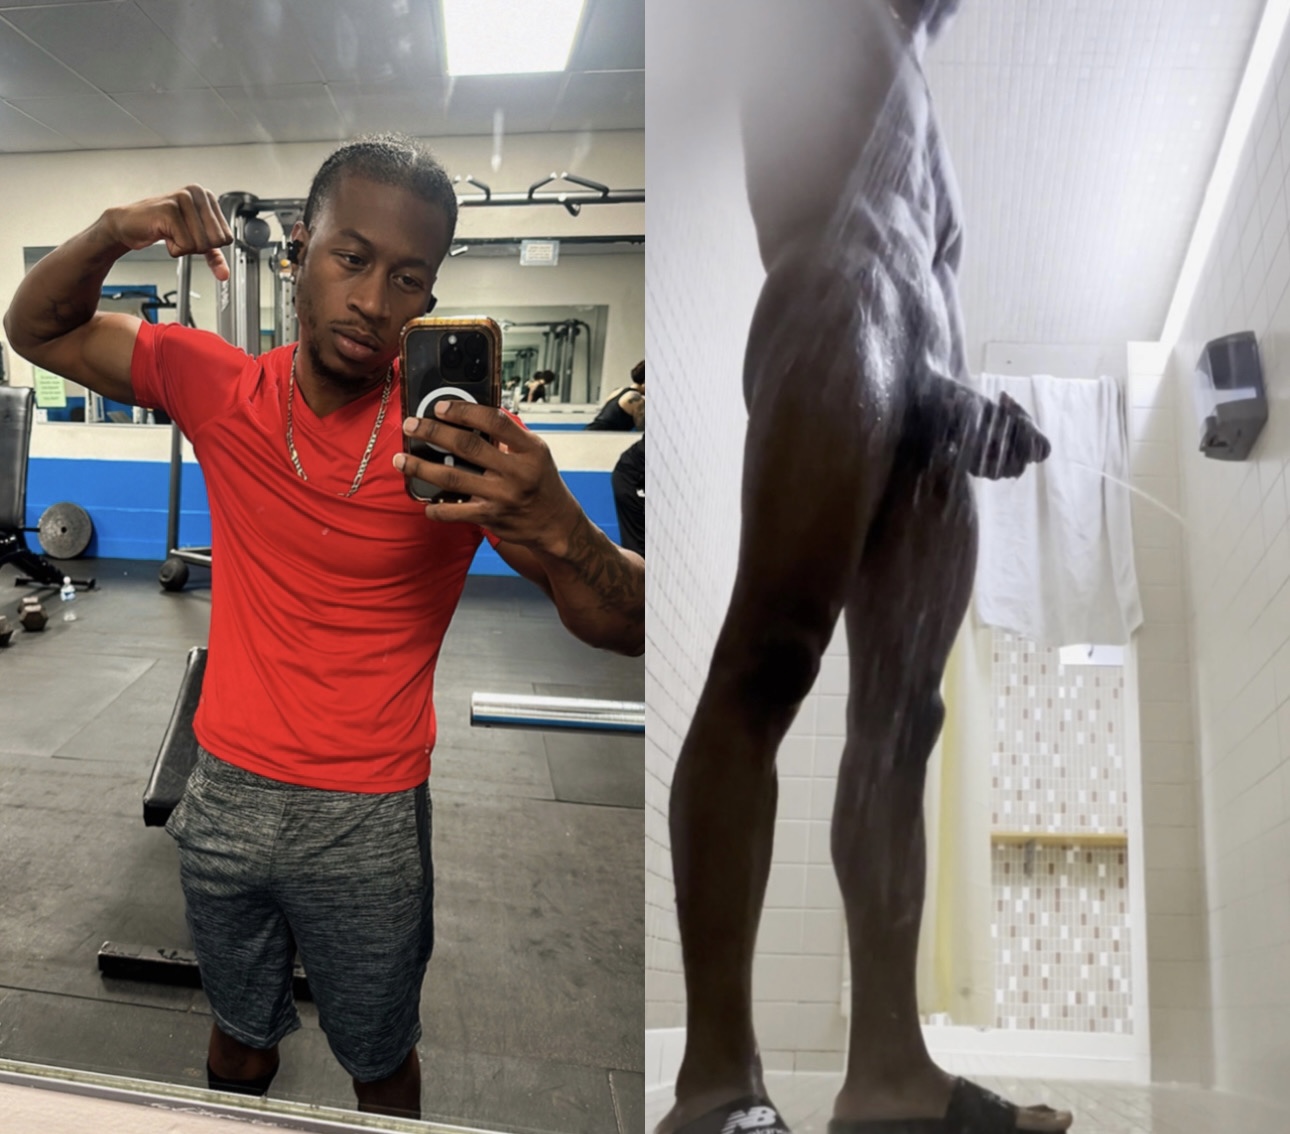 Exhibitionist bull *PEES* in gym shower!